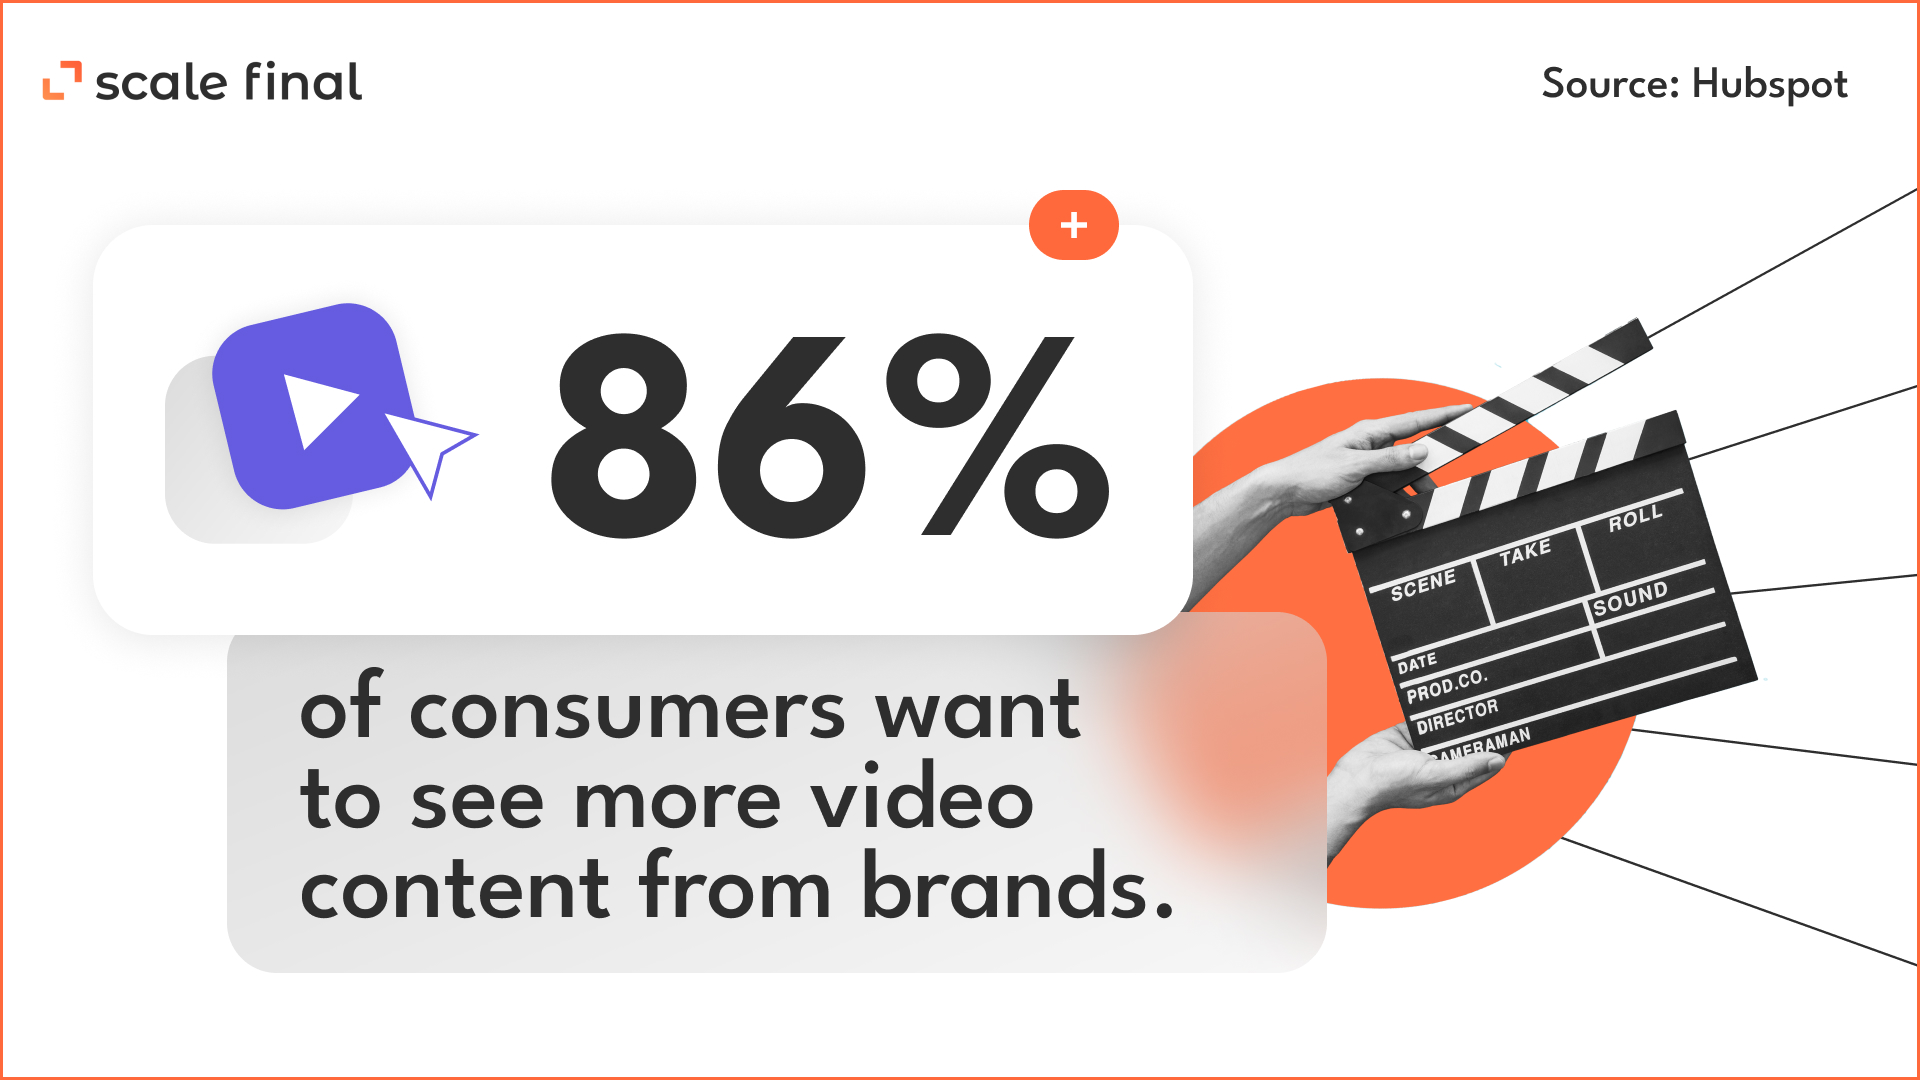 86% of consumers want to see more video content from brands.
source Hubspot